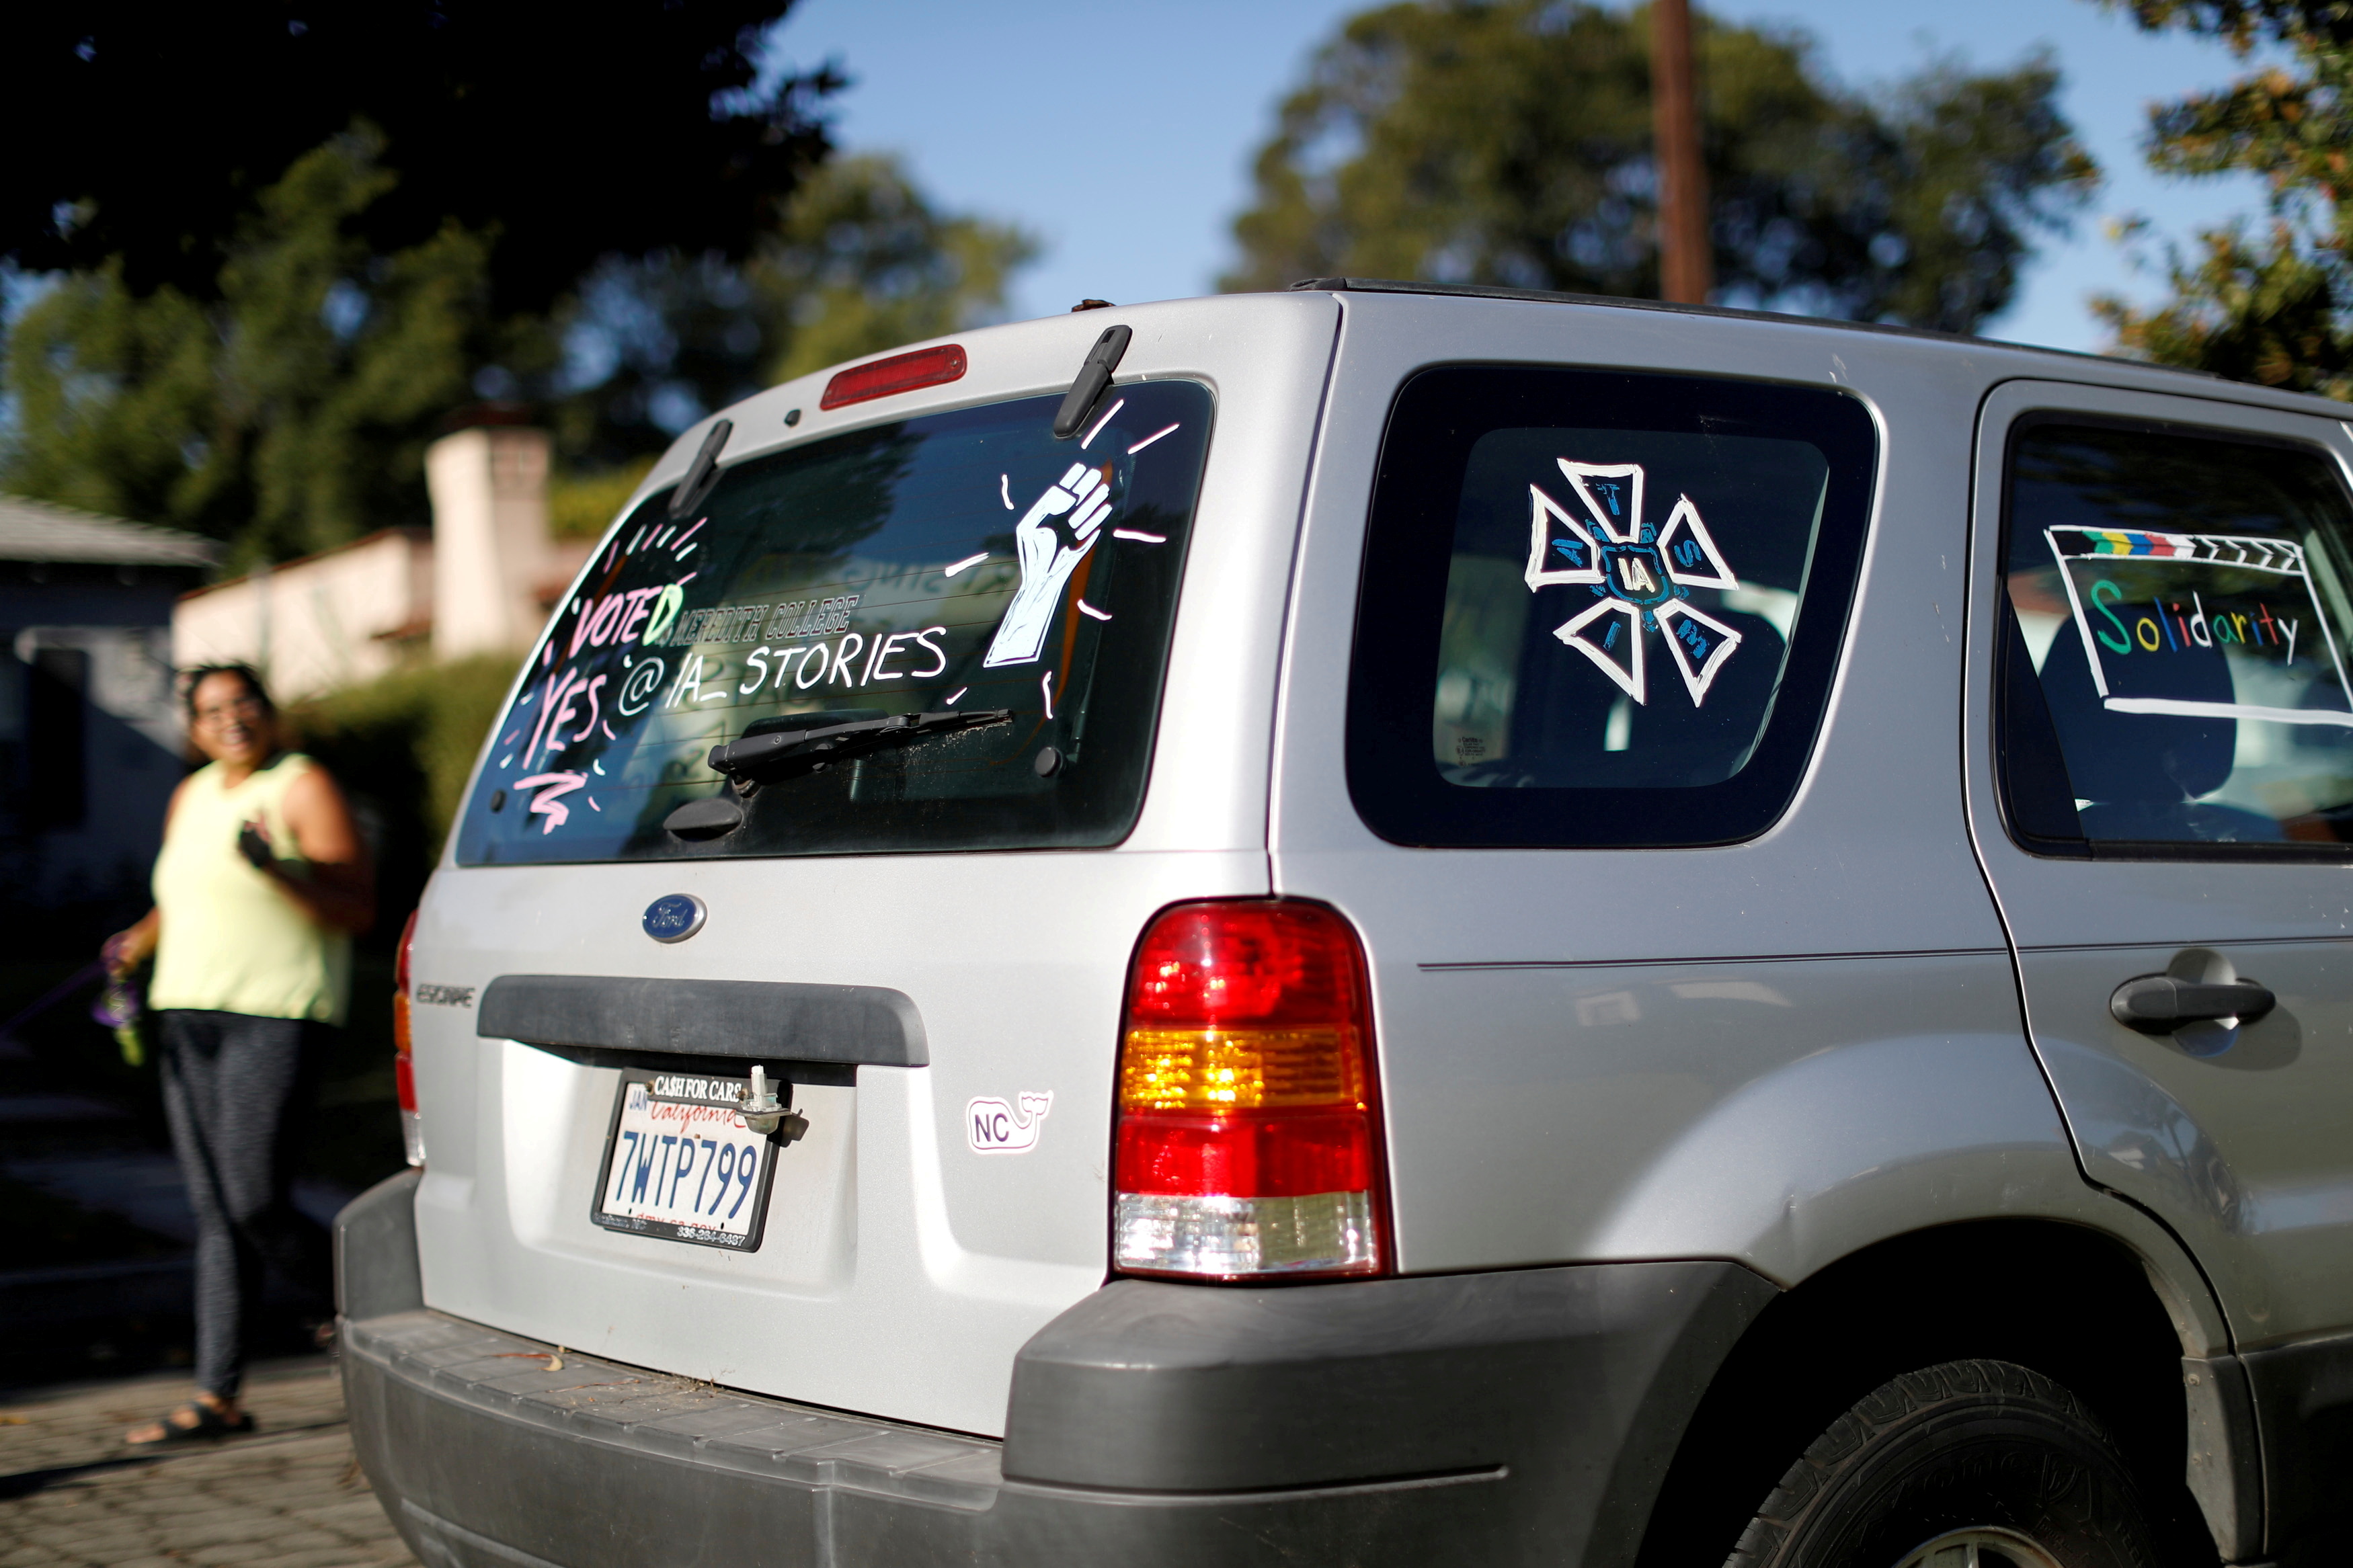 The adorned car windows of a neighbouring vehicle are pictured the day after 90% of IATSE Local 871 members cast ballots and more than 98% of the votes returned were in favor of authorizing a strike in Glendale